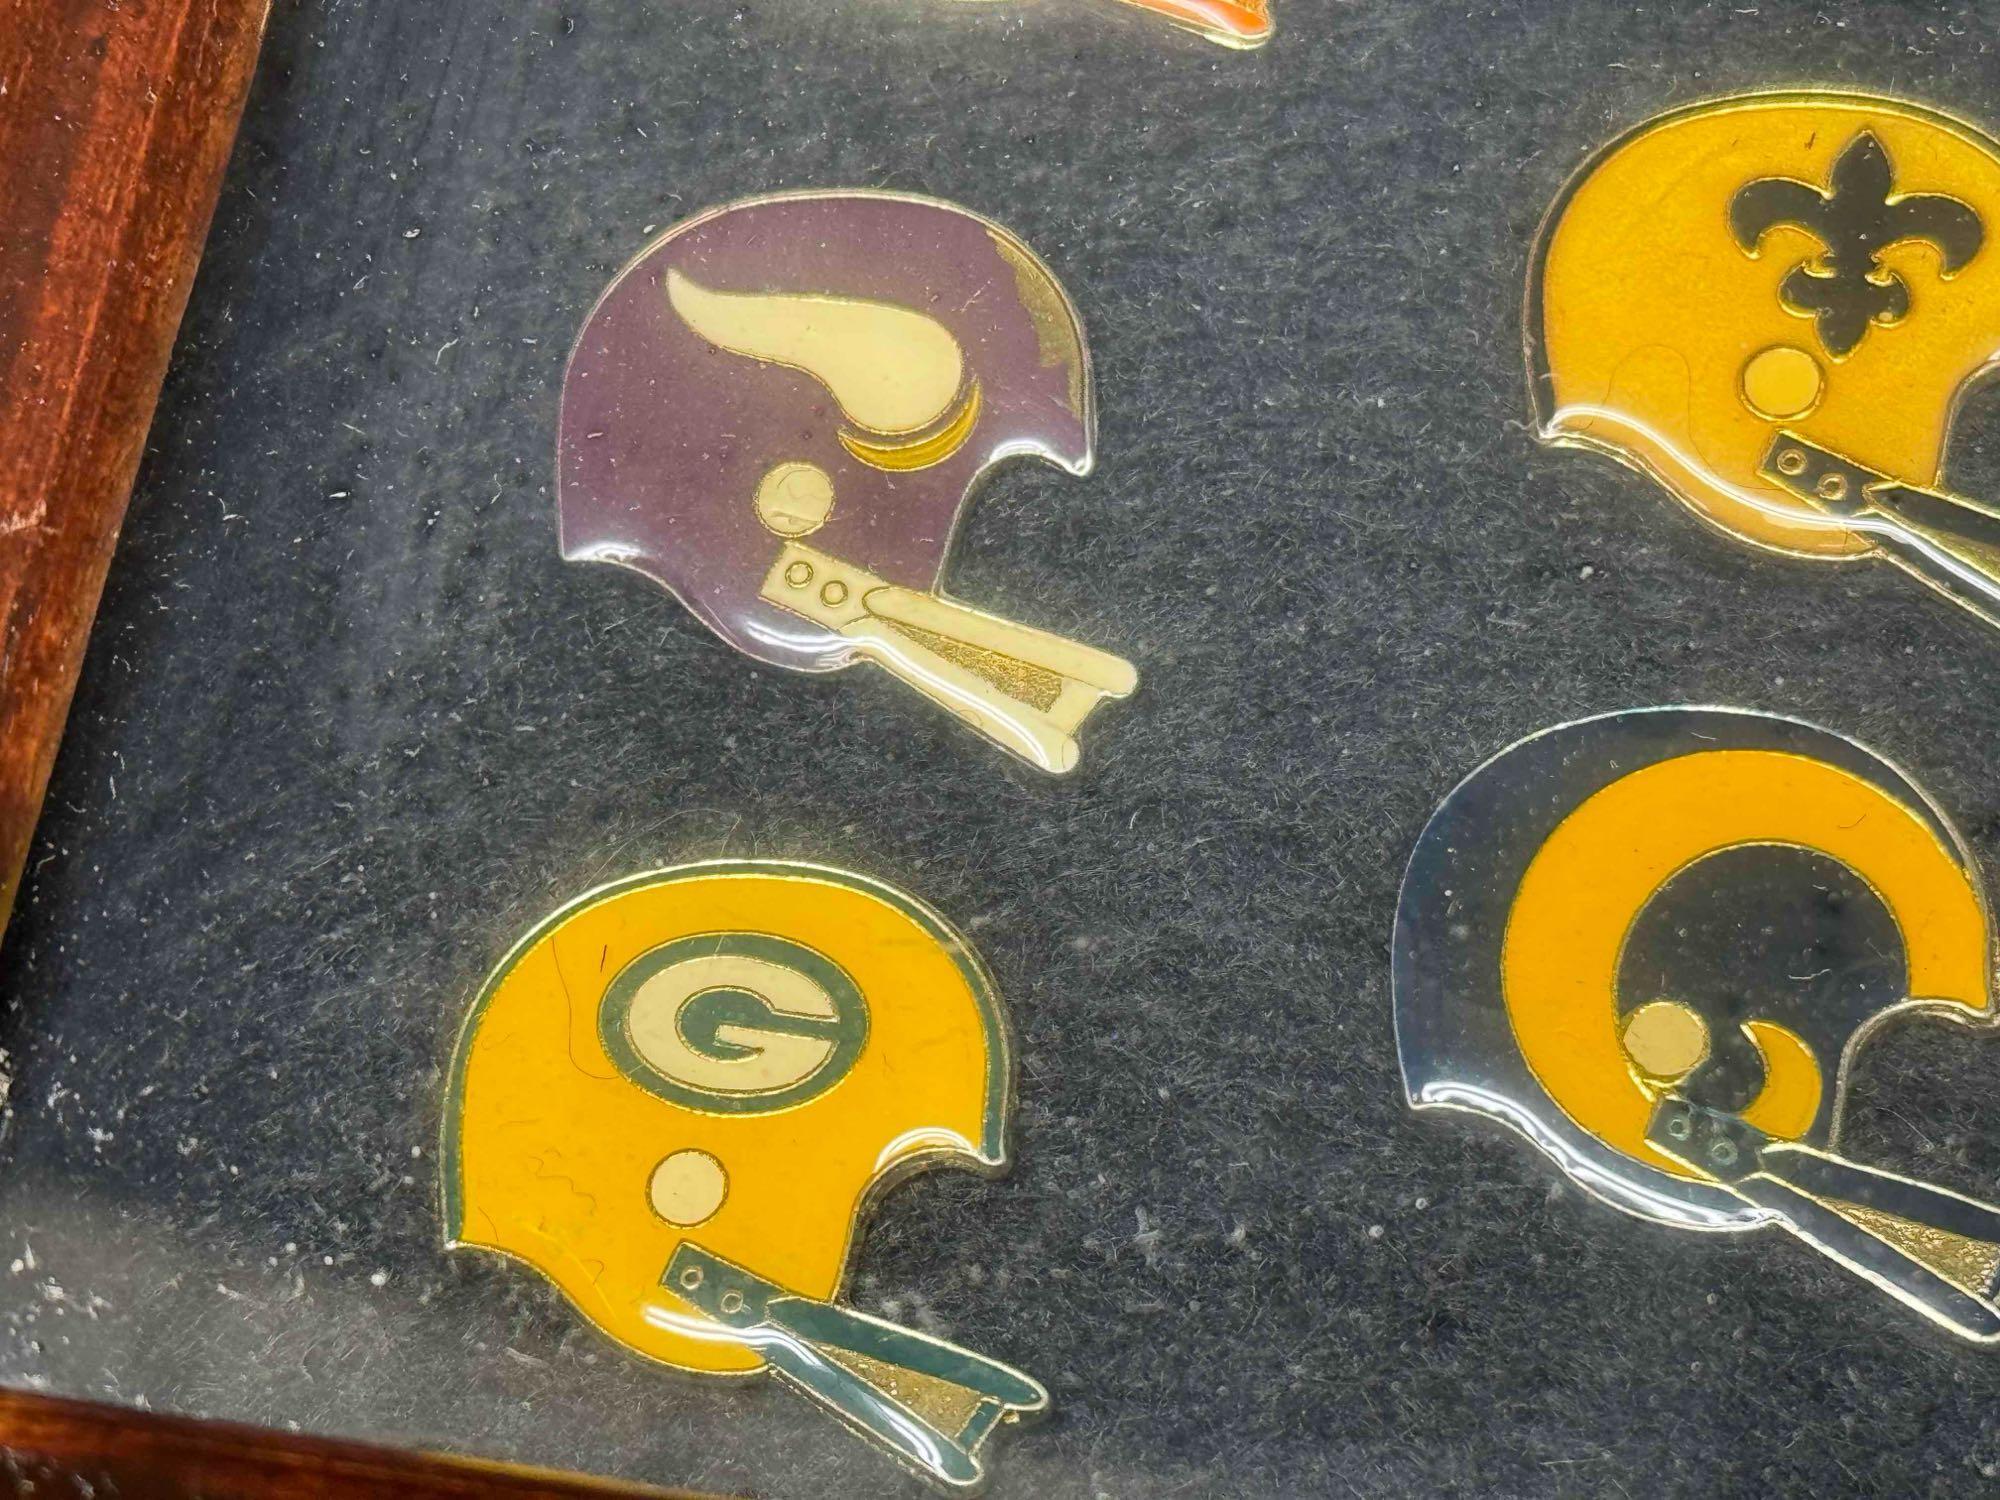 NFL Team Helmet Pins in Framed Display Cases. Chargers, Chiefs, 49ers more